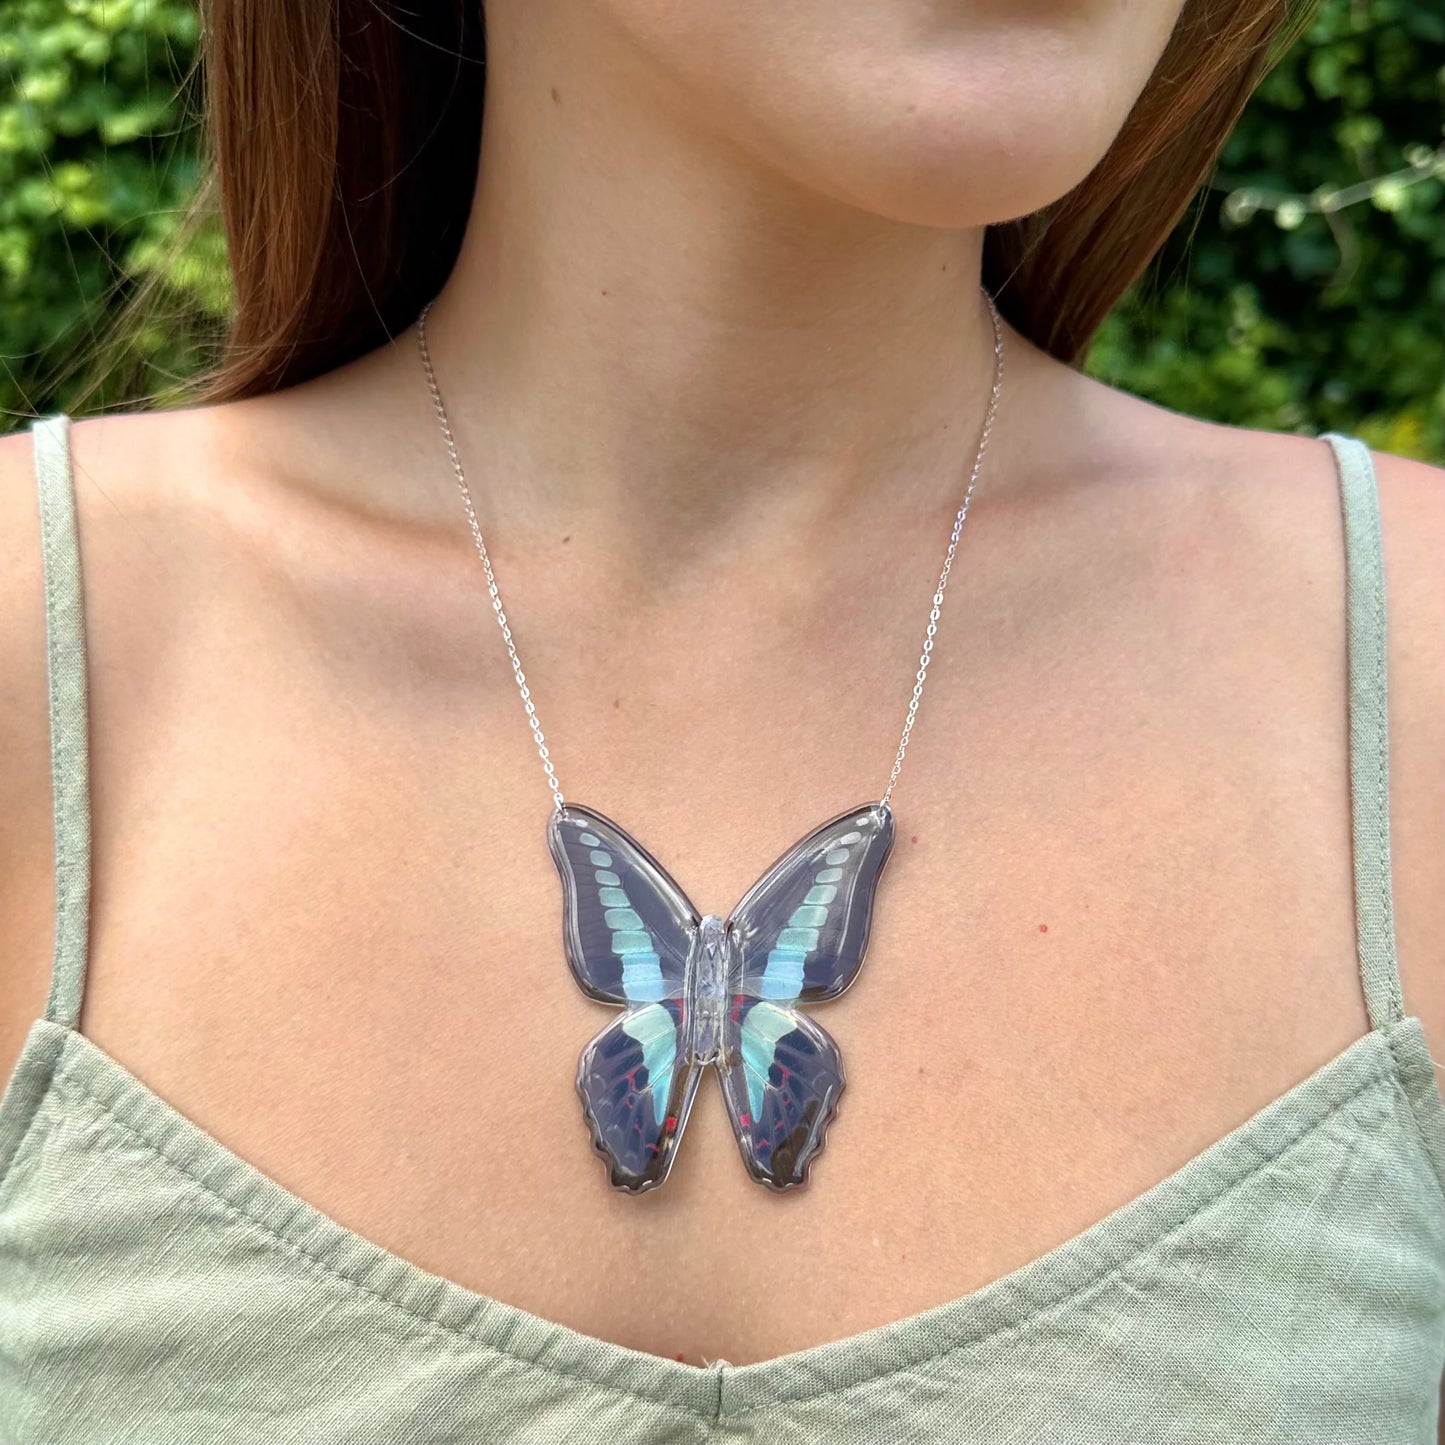 Necklace- Real Butterfly Wings